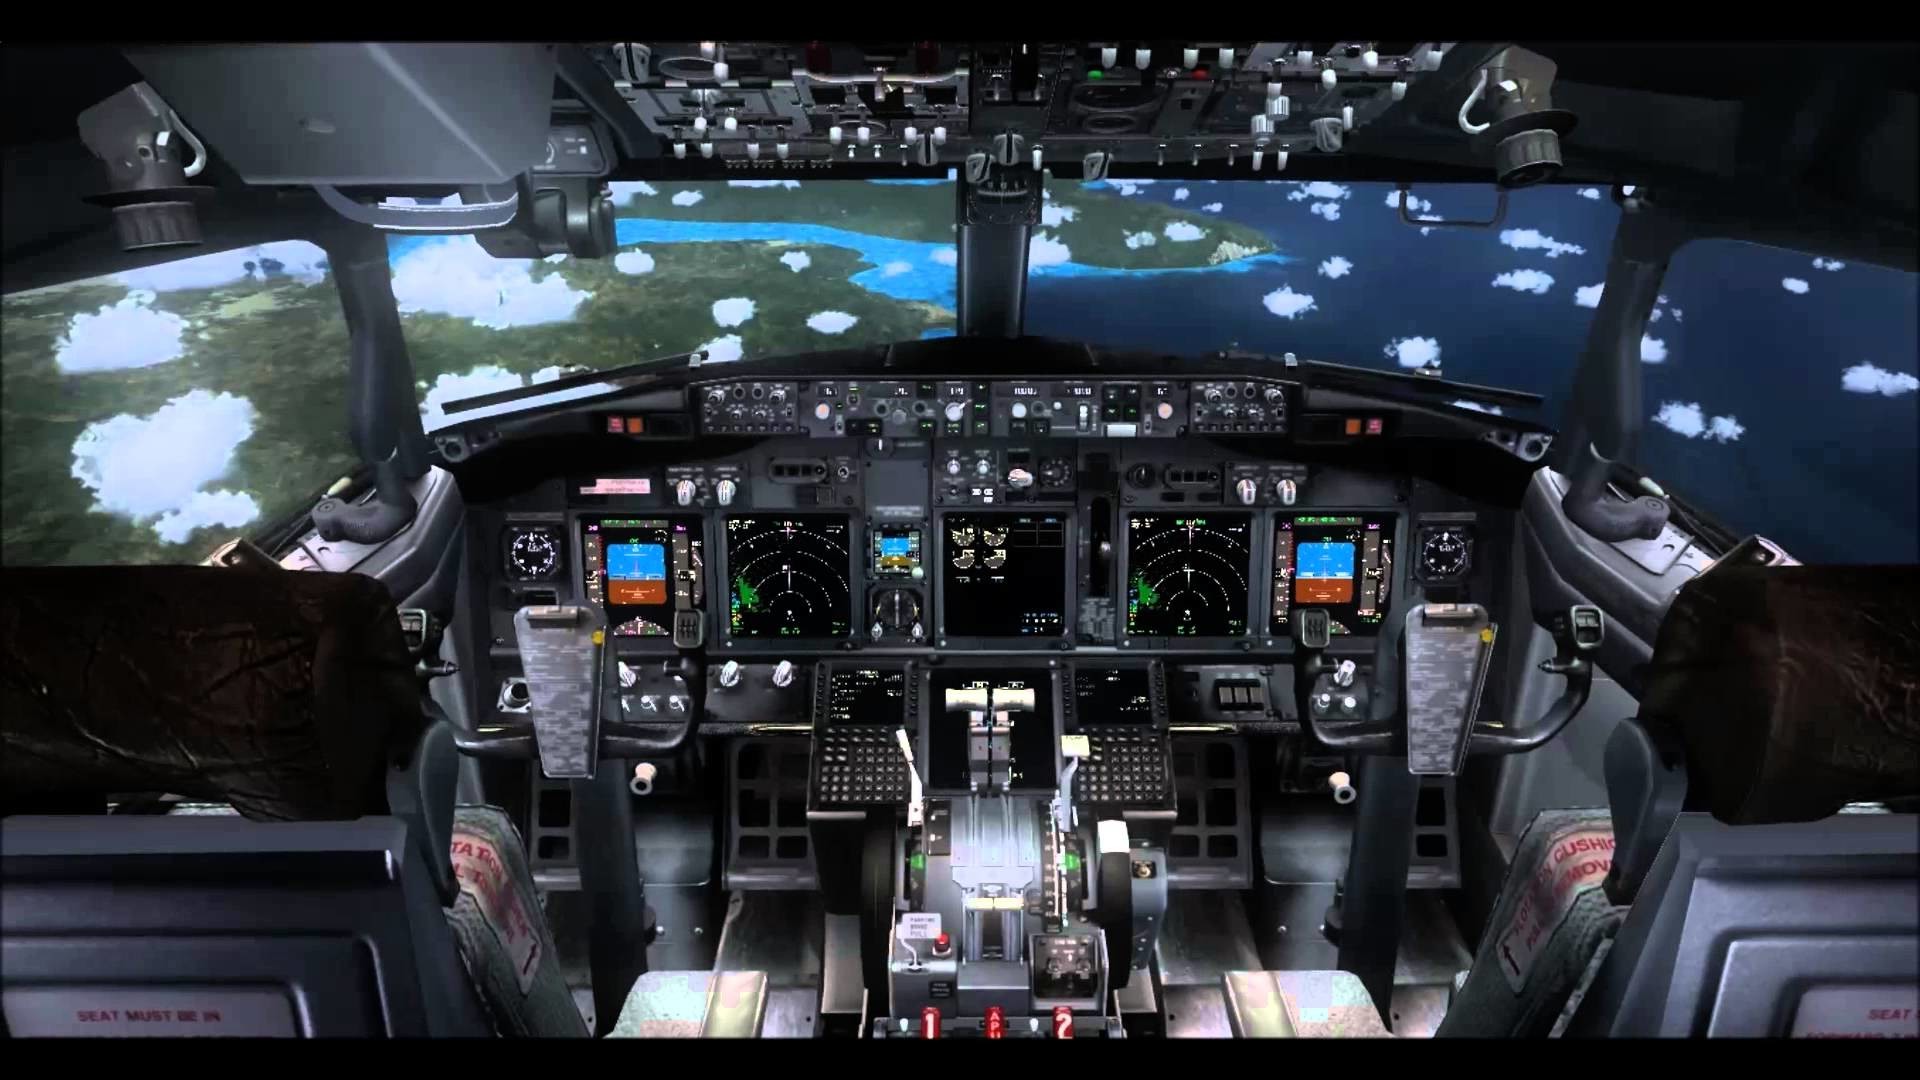 1920x1080 Displaying 15> Images For - Boeing 787 Cockpit Wallpaper.